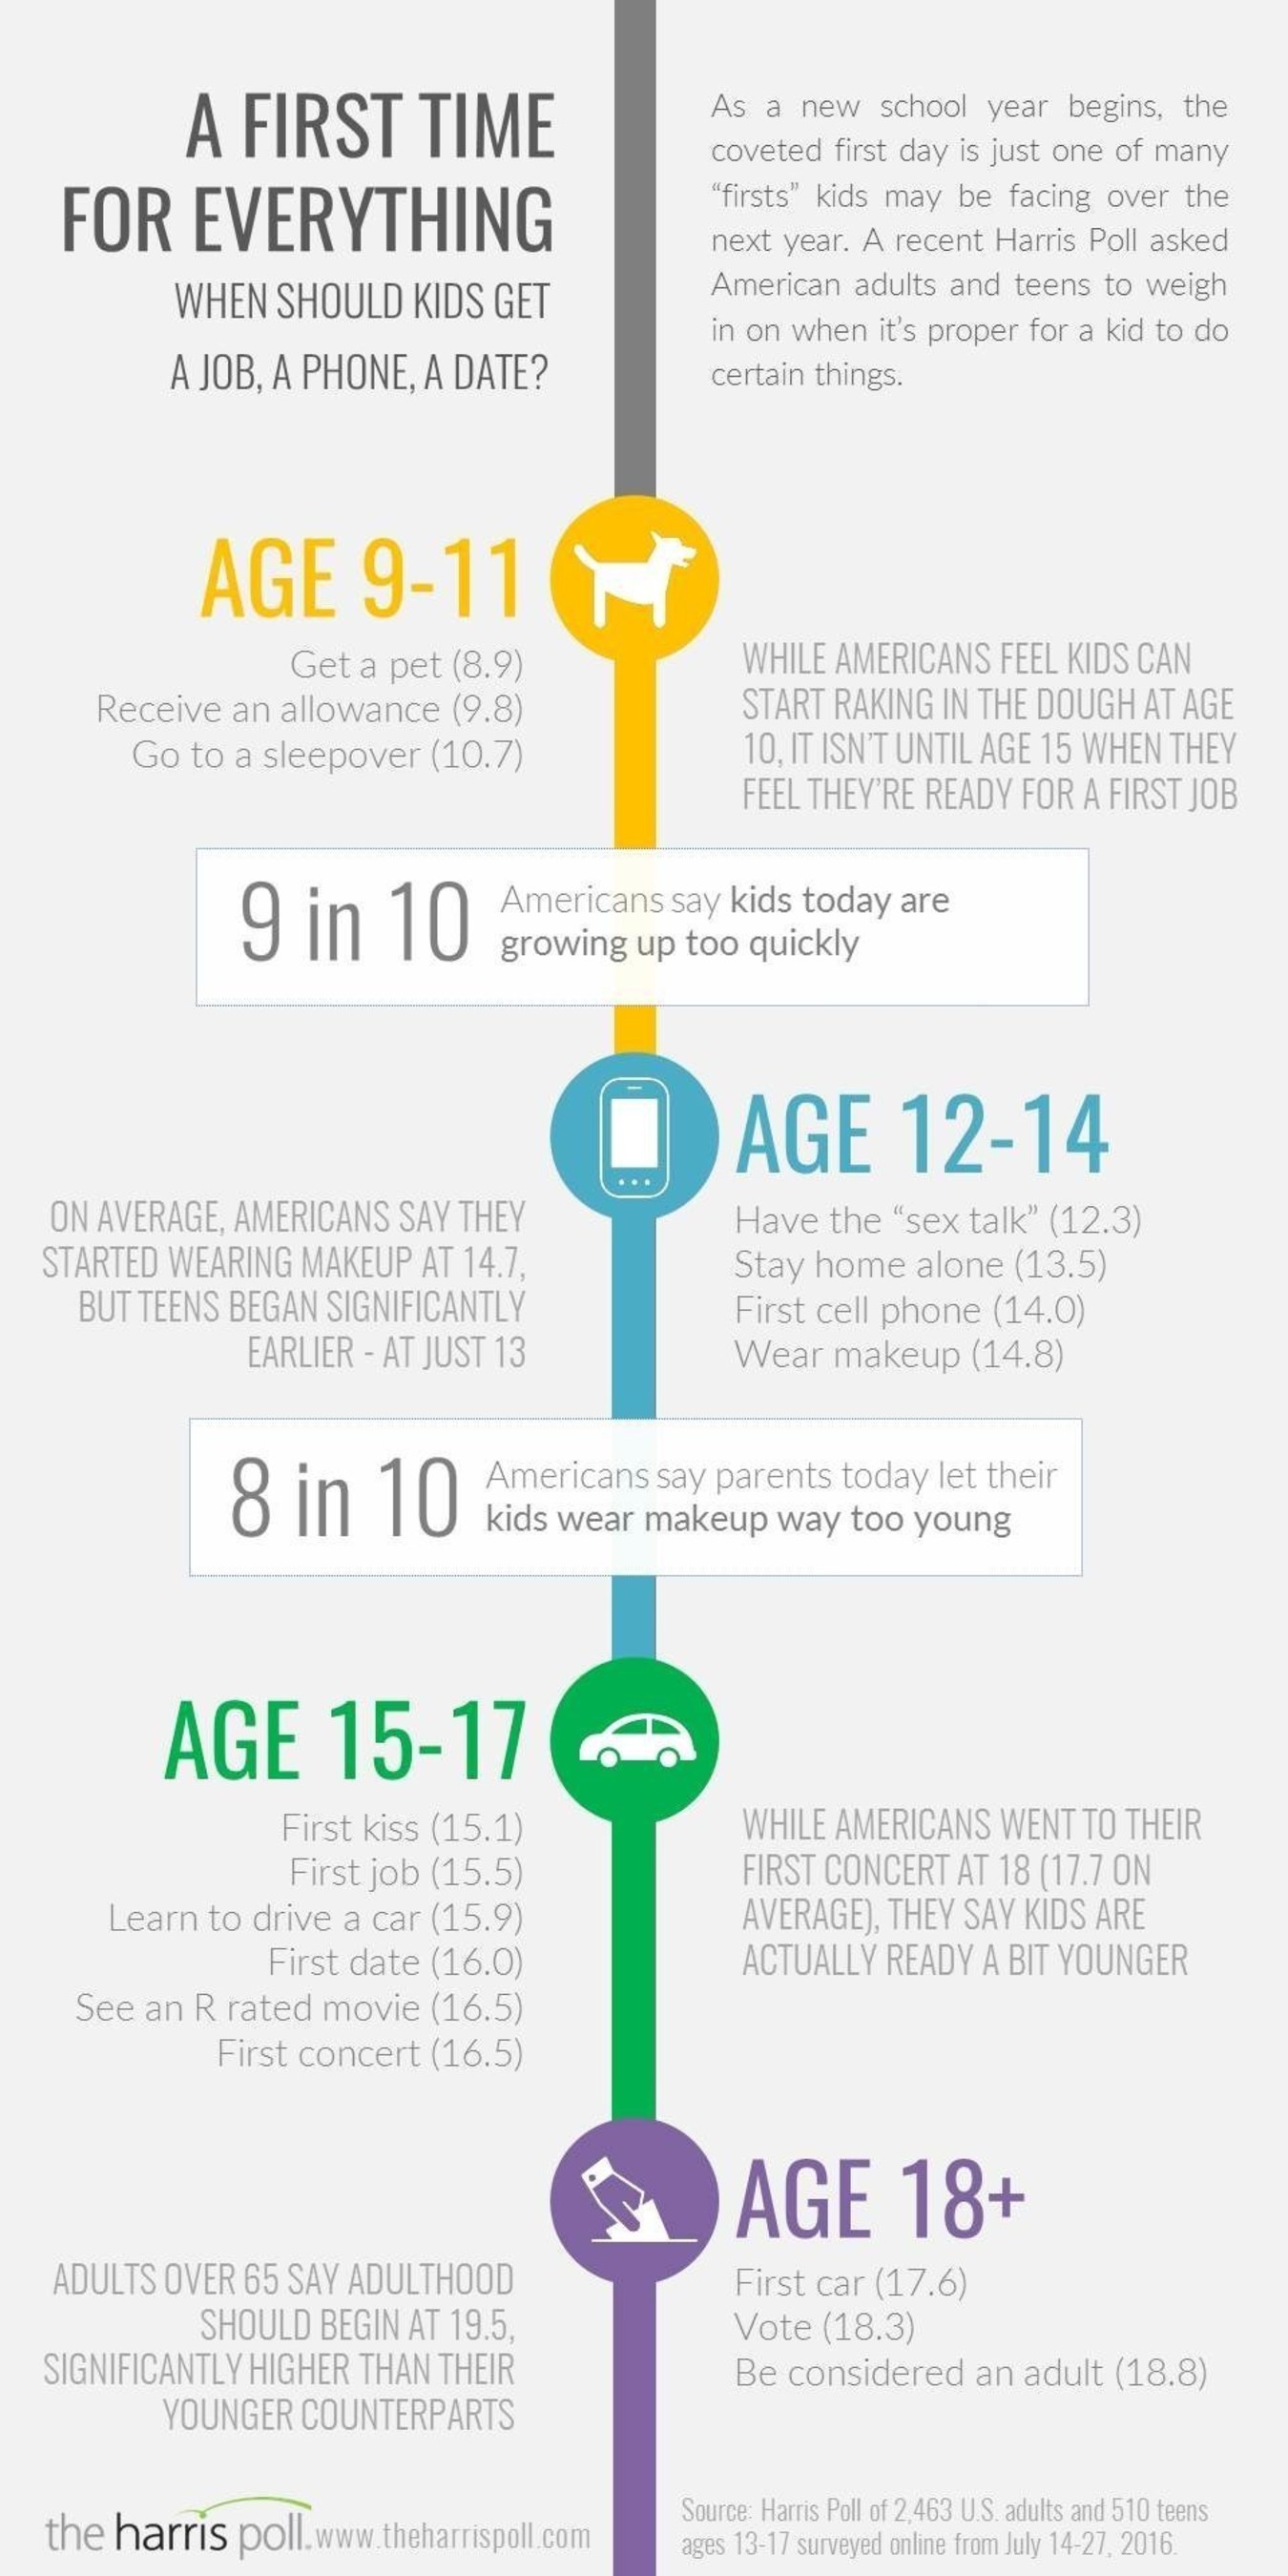 What age should a kid start dating?